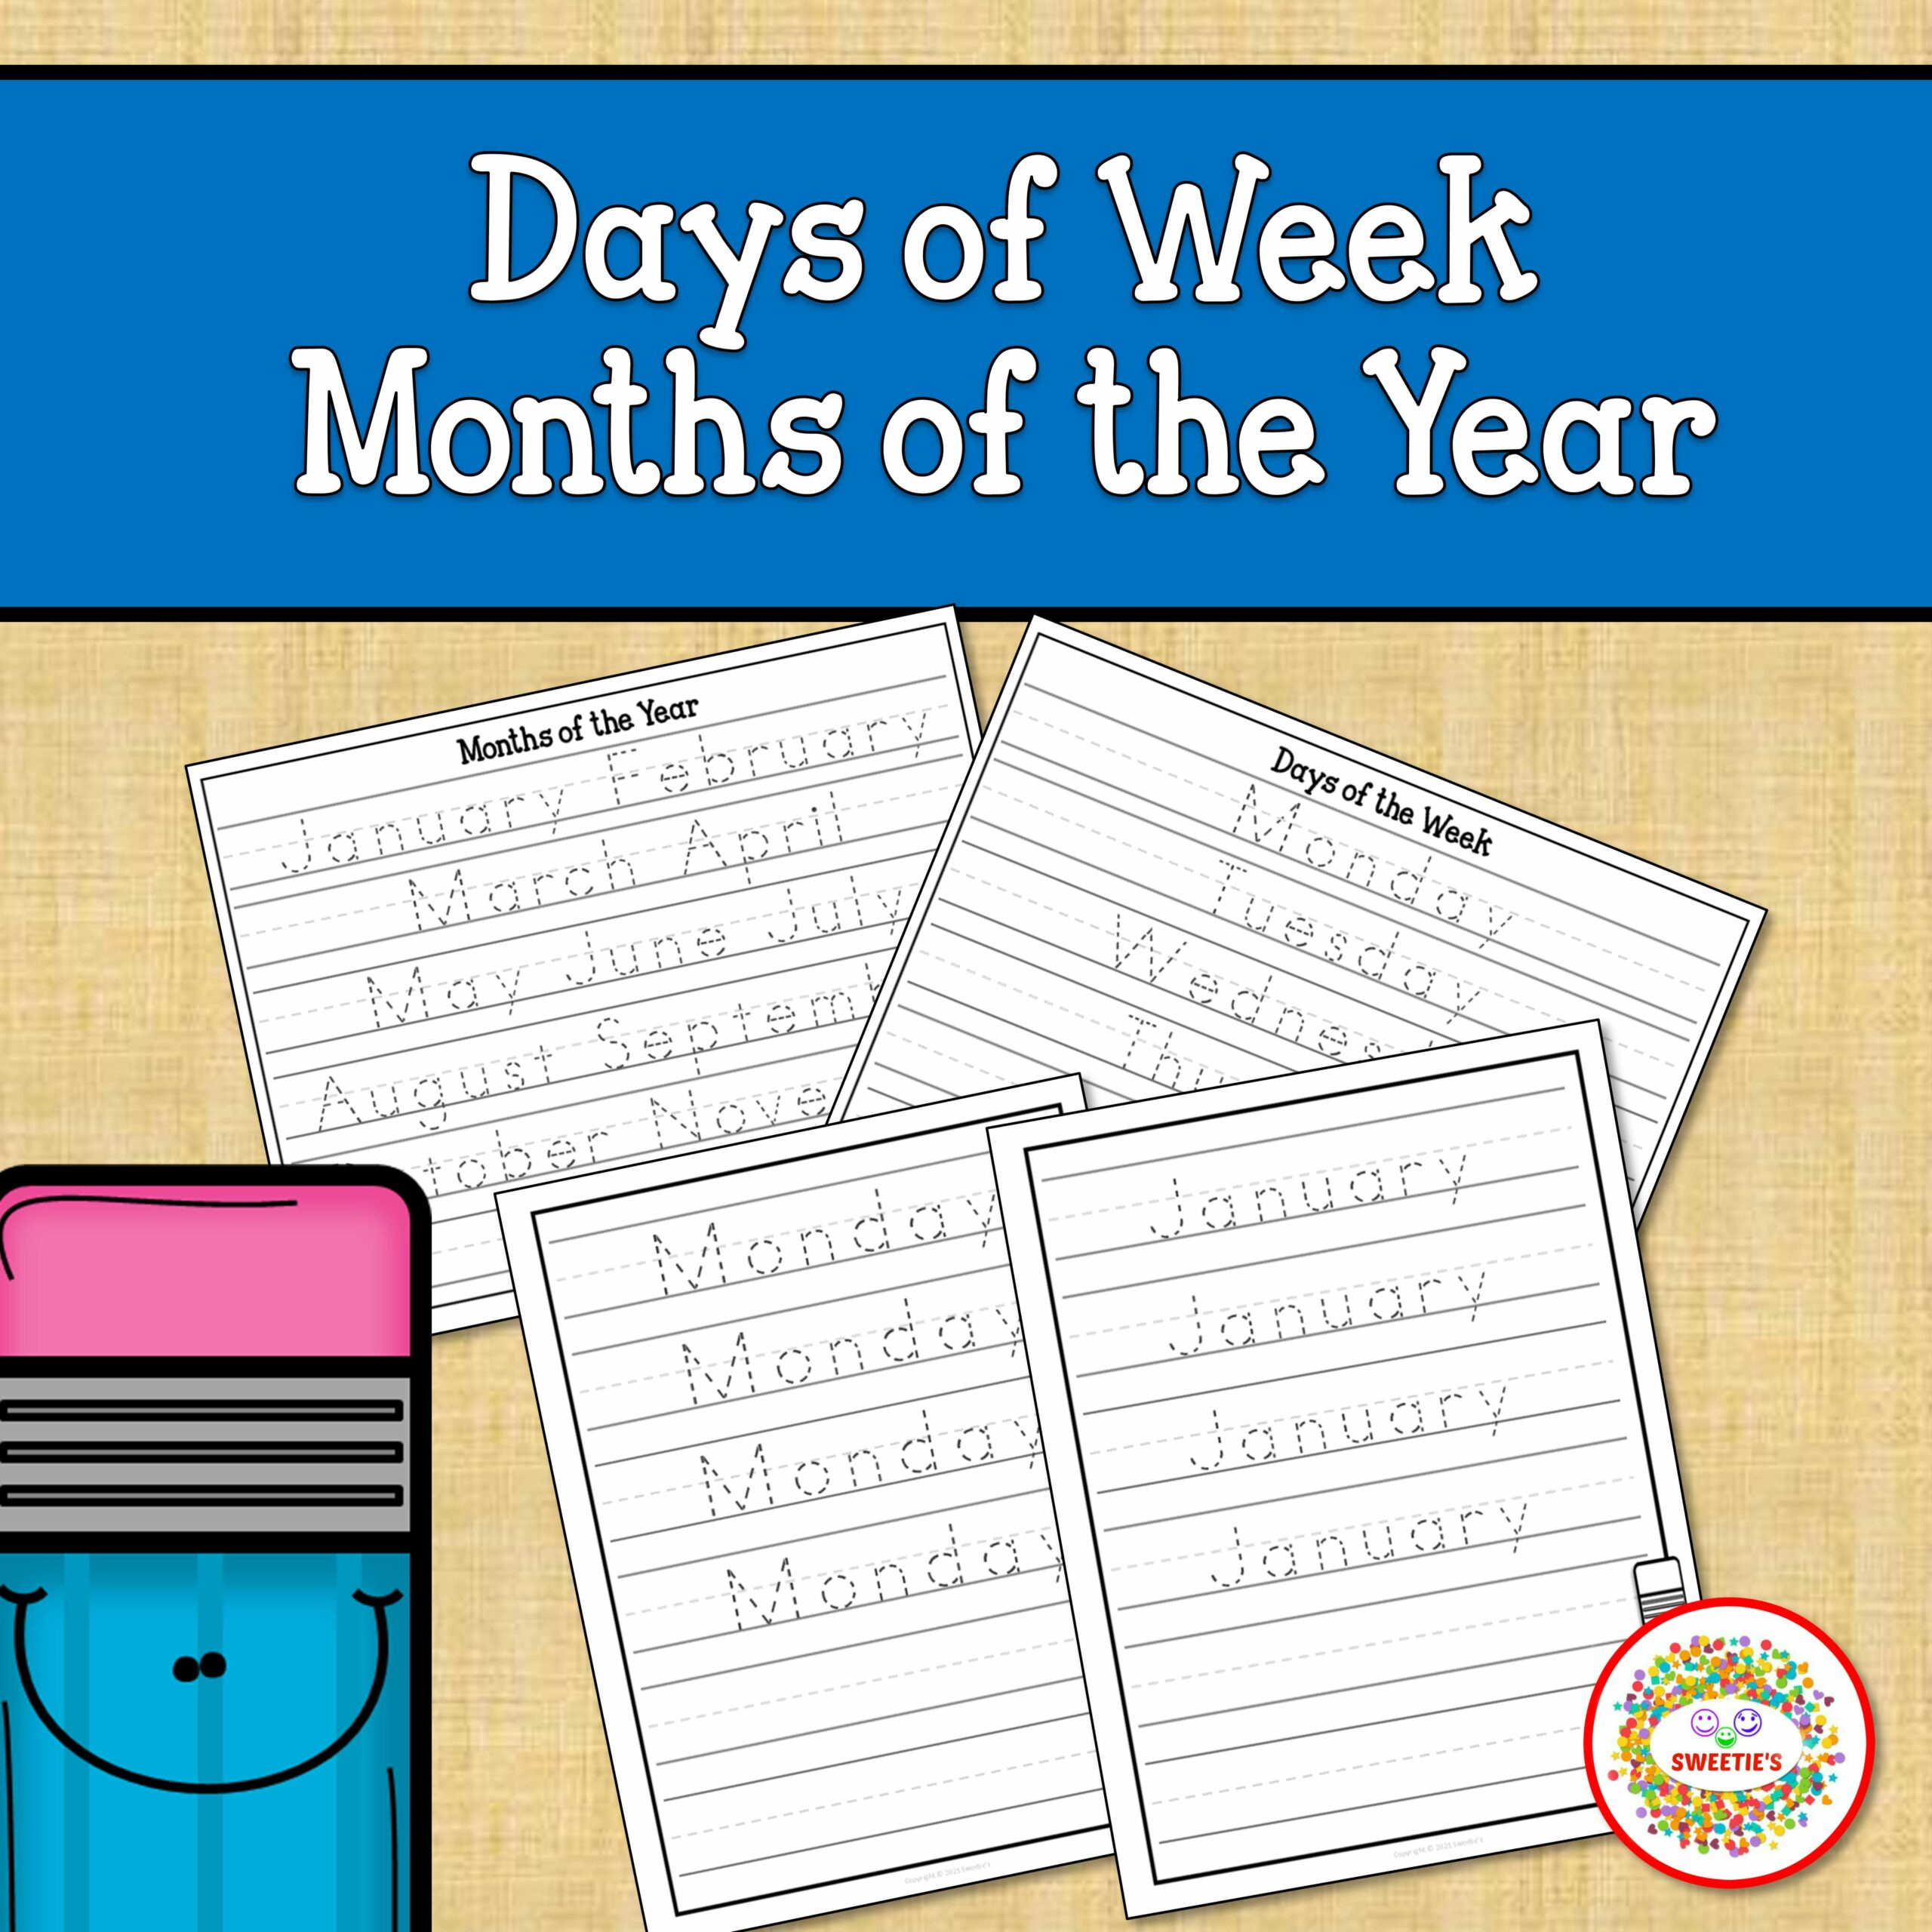 Days Of The Week And Months Of The Year Worksheets  Made By Teachers throughout Week Days By Month